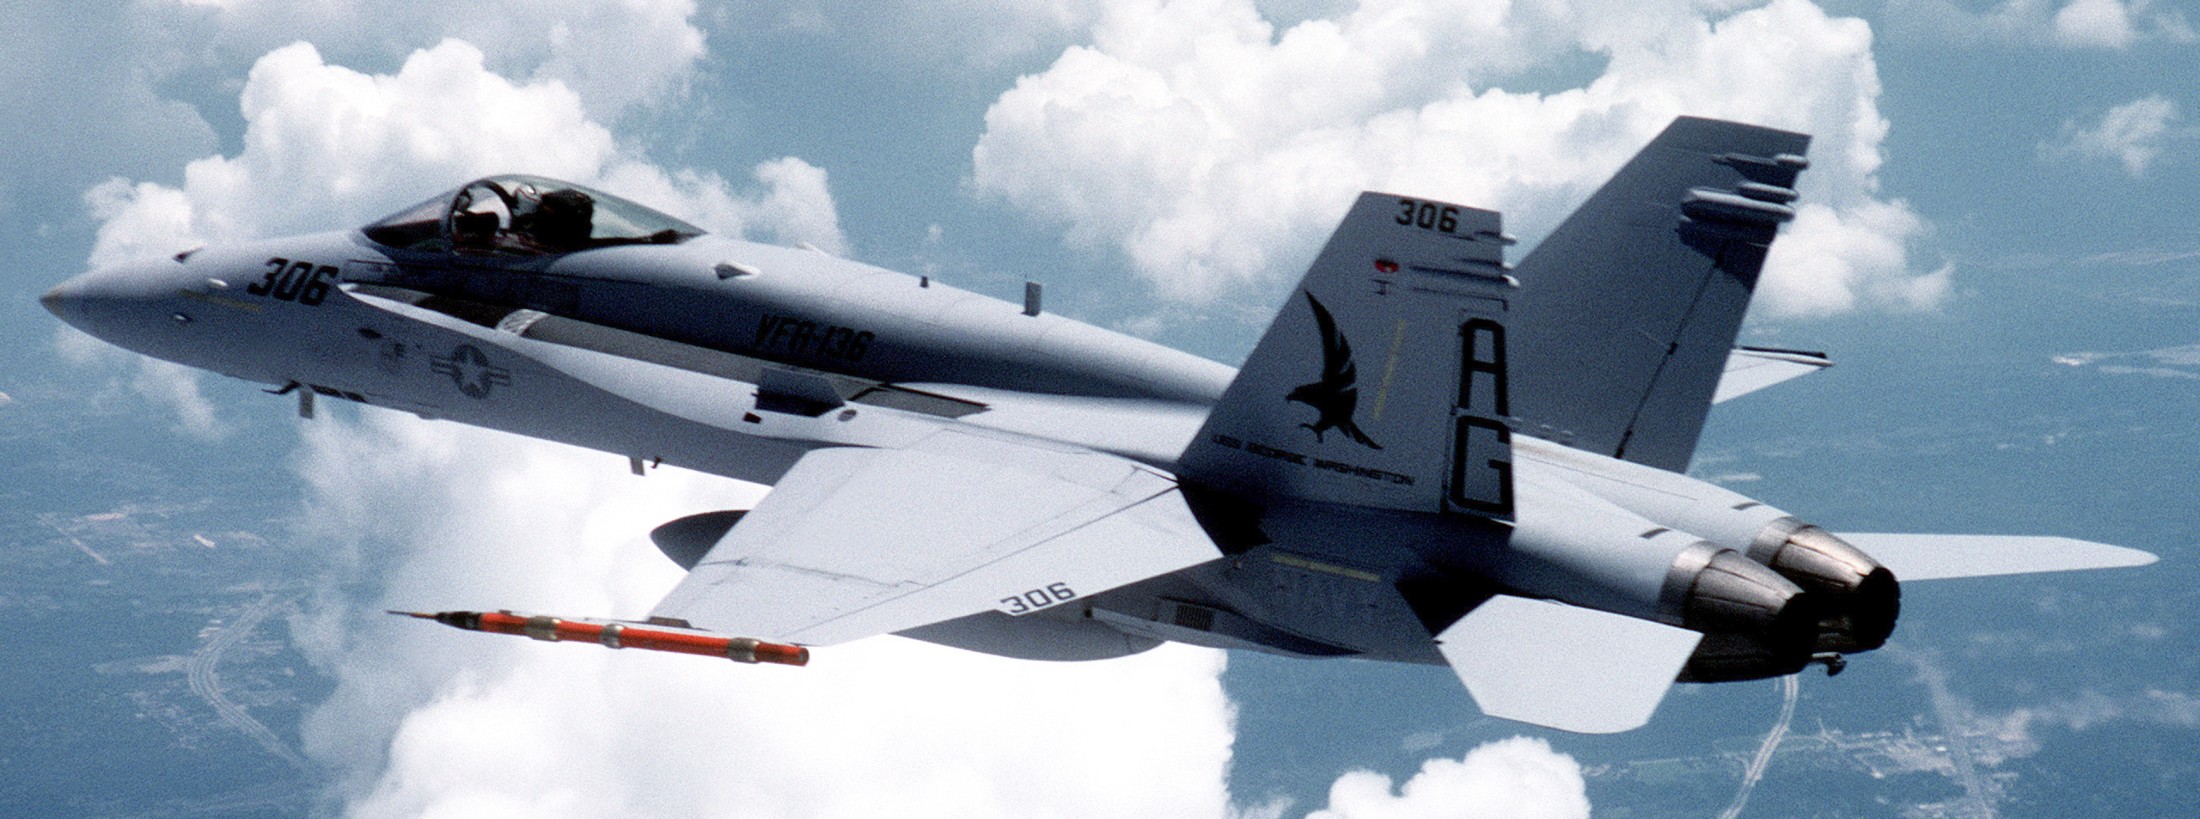 vfa-136 knighthawks strike fighter squadron f/a-18c hornet 1992 57 cvw-7 carrier air wing